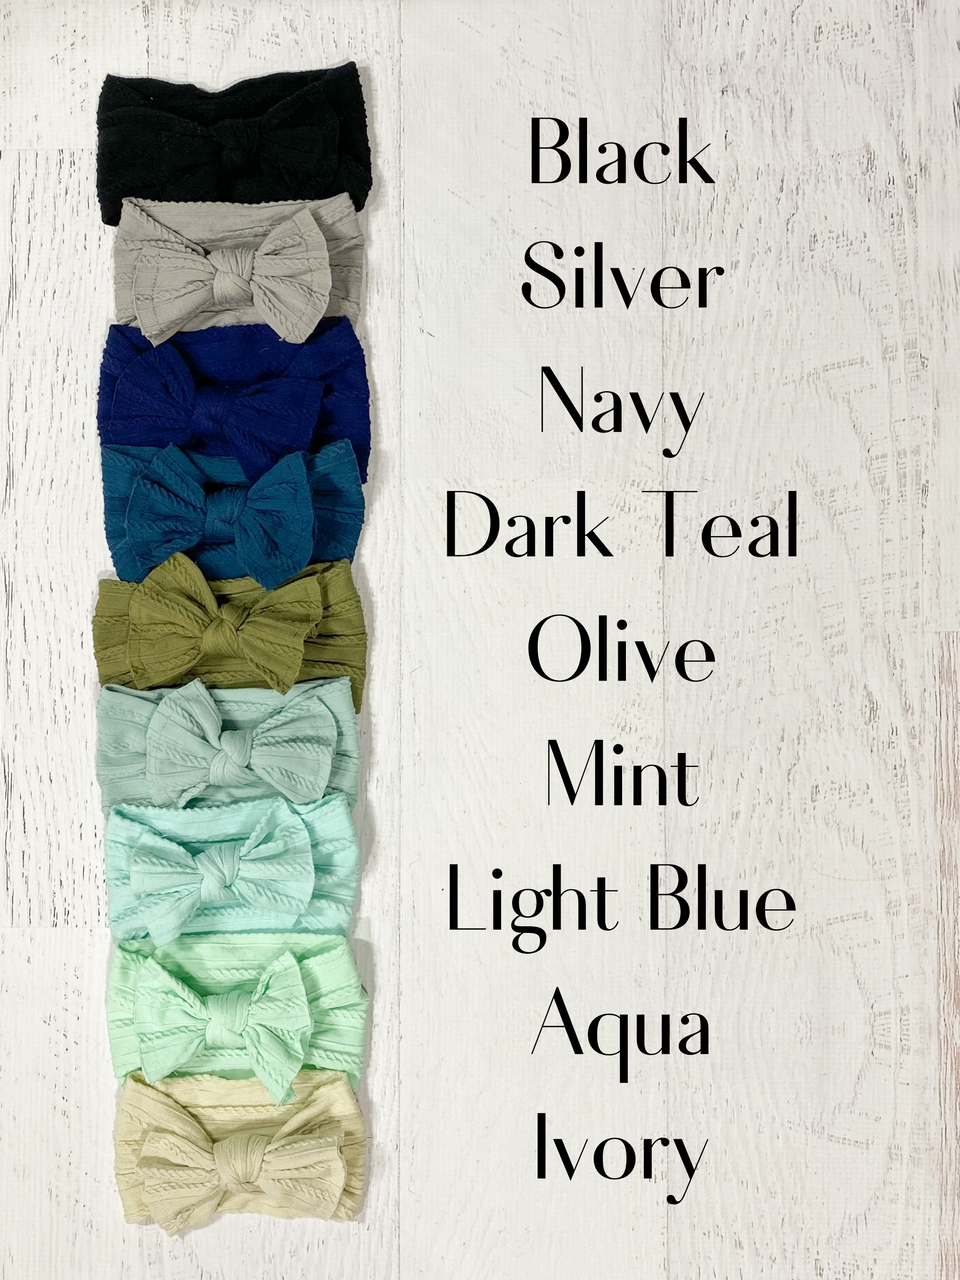 Cable Knit Bow Headbands in Black, Silver, Navy, Dark Teal, Olive, Mint, Light Blue, Aqua, Ivory